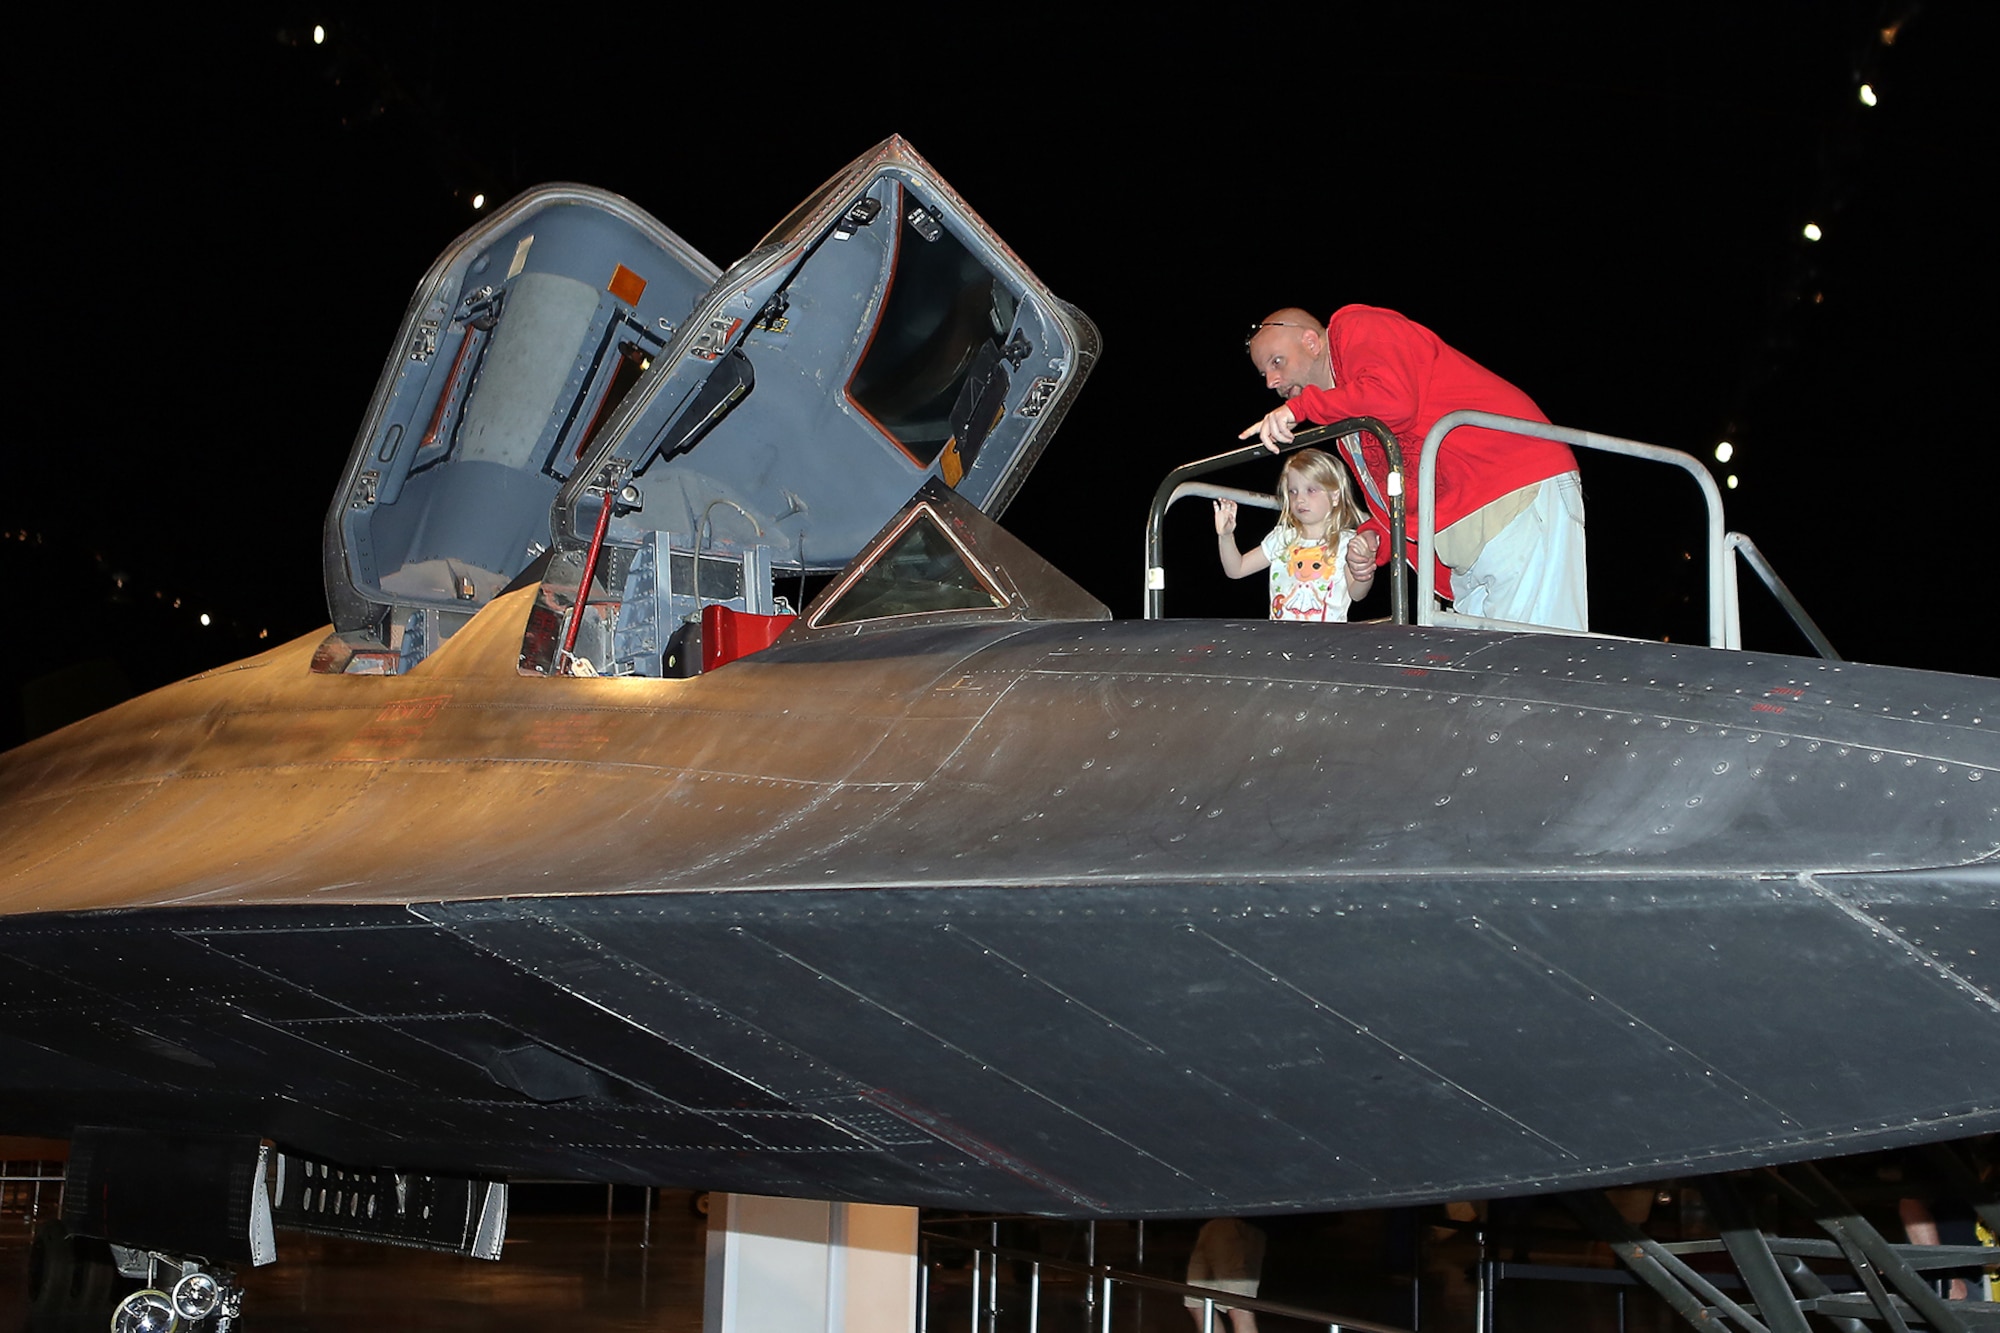 DAYTON, Ohio (05/2013) -- Visitors get an up-close look at the SR-71 cockpit during Space Fest on May 4 at the National Museum of the U.S. Air Force. (U.S. Air Force photo by Don Popp)